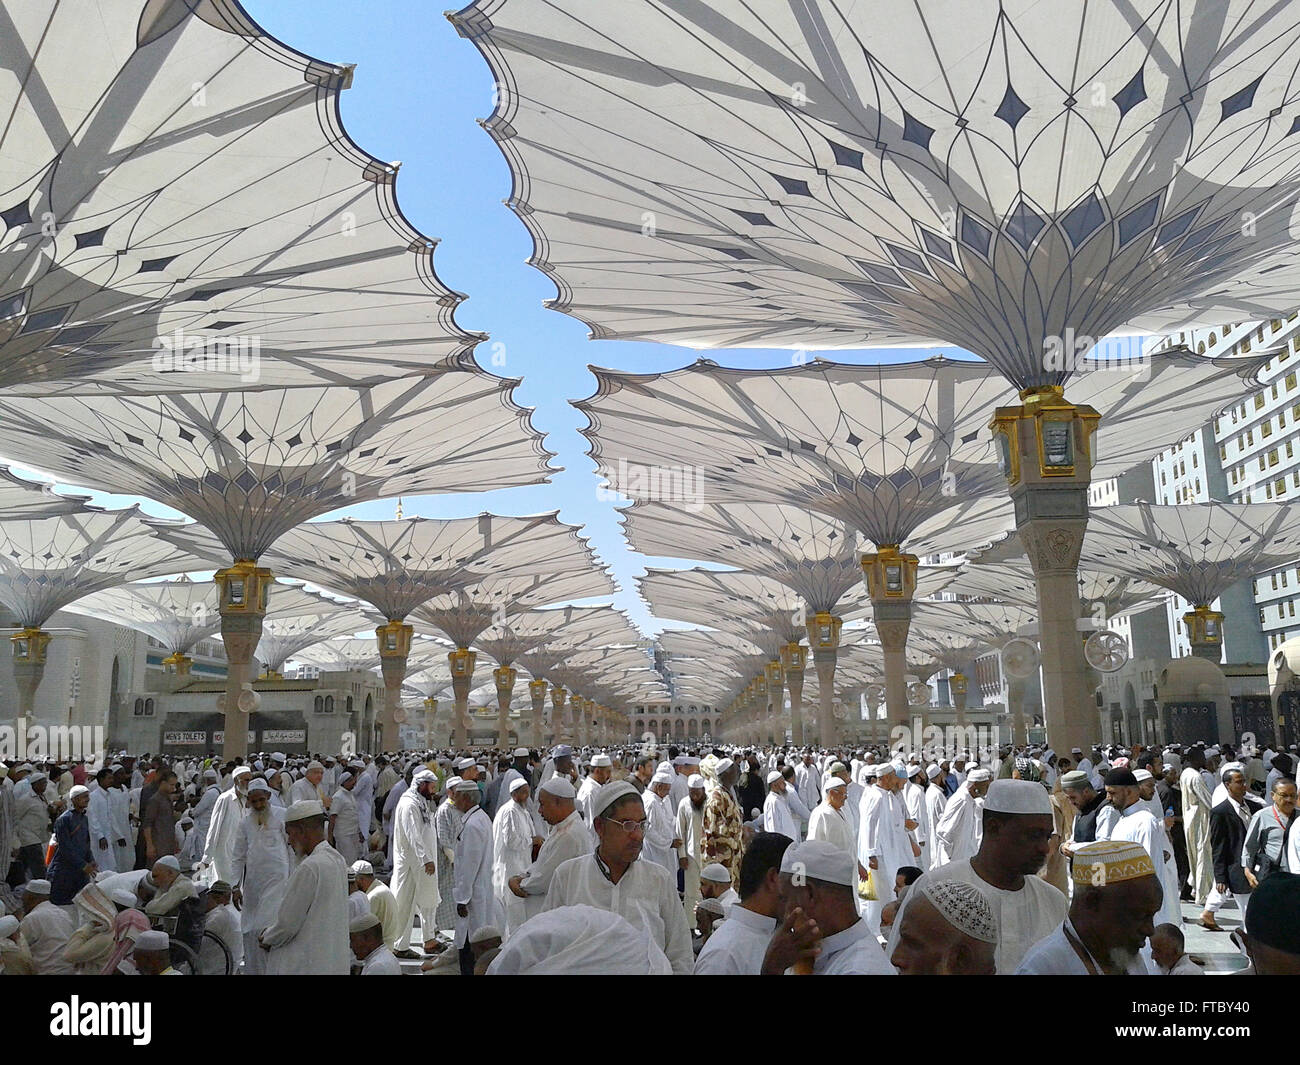 Thousands of Muslim hajj pilgrims rest and relax under the Masjid Nabwi  umbrellas in Mecca, al-Hejaz, Saudi Arabia. The high-tech giant sunshades  provide protection for pilgrims waiting to enter the Nabawi mosque